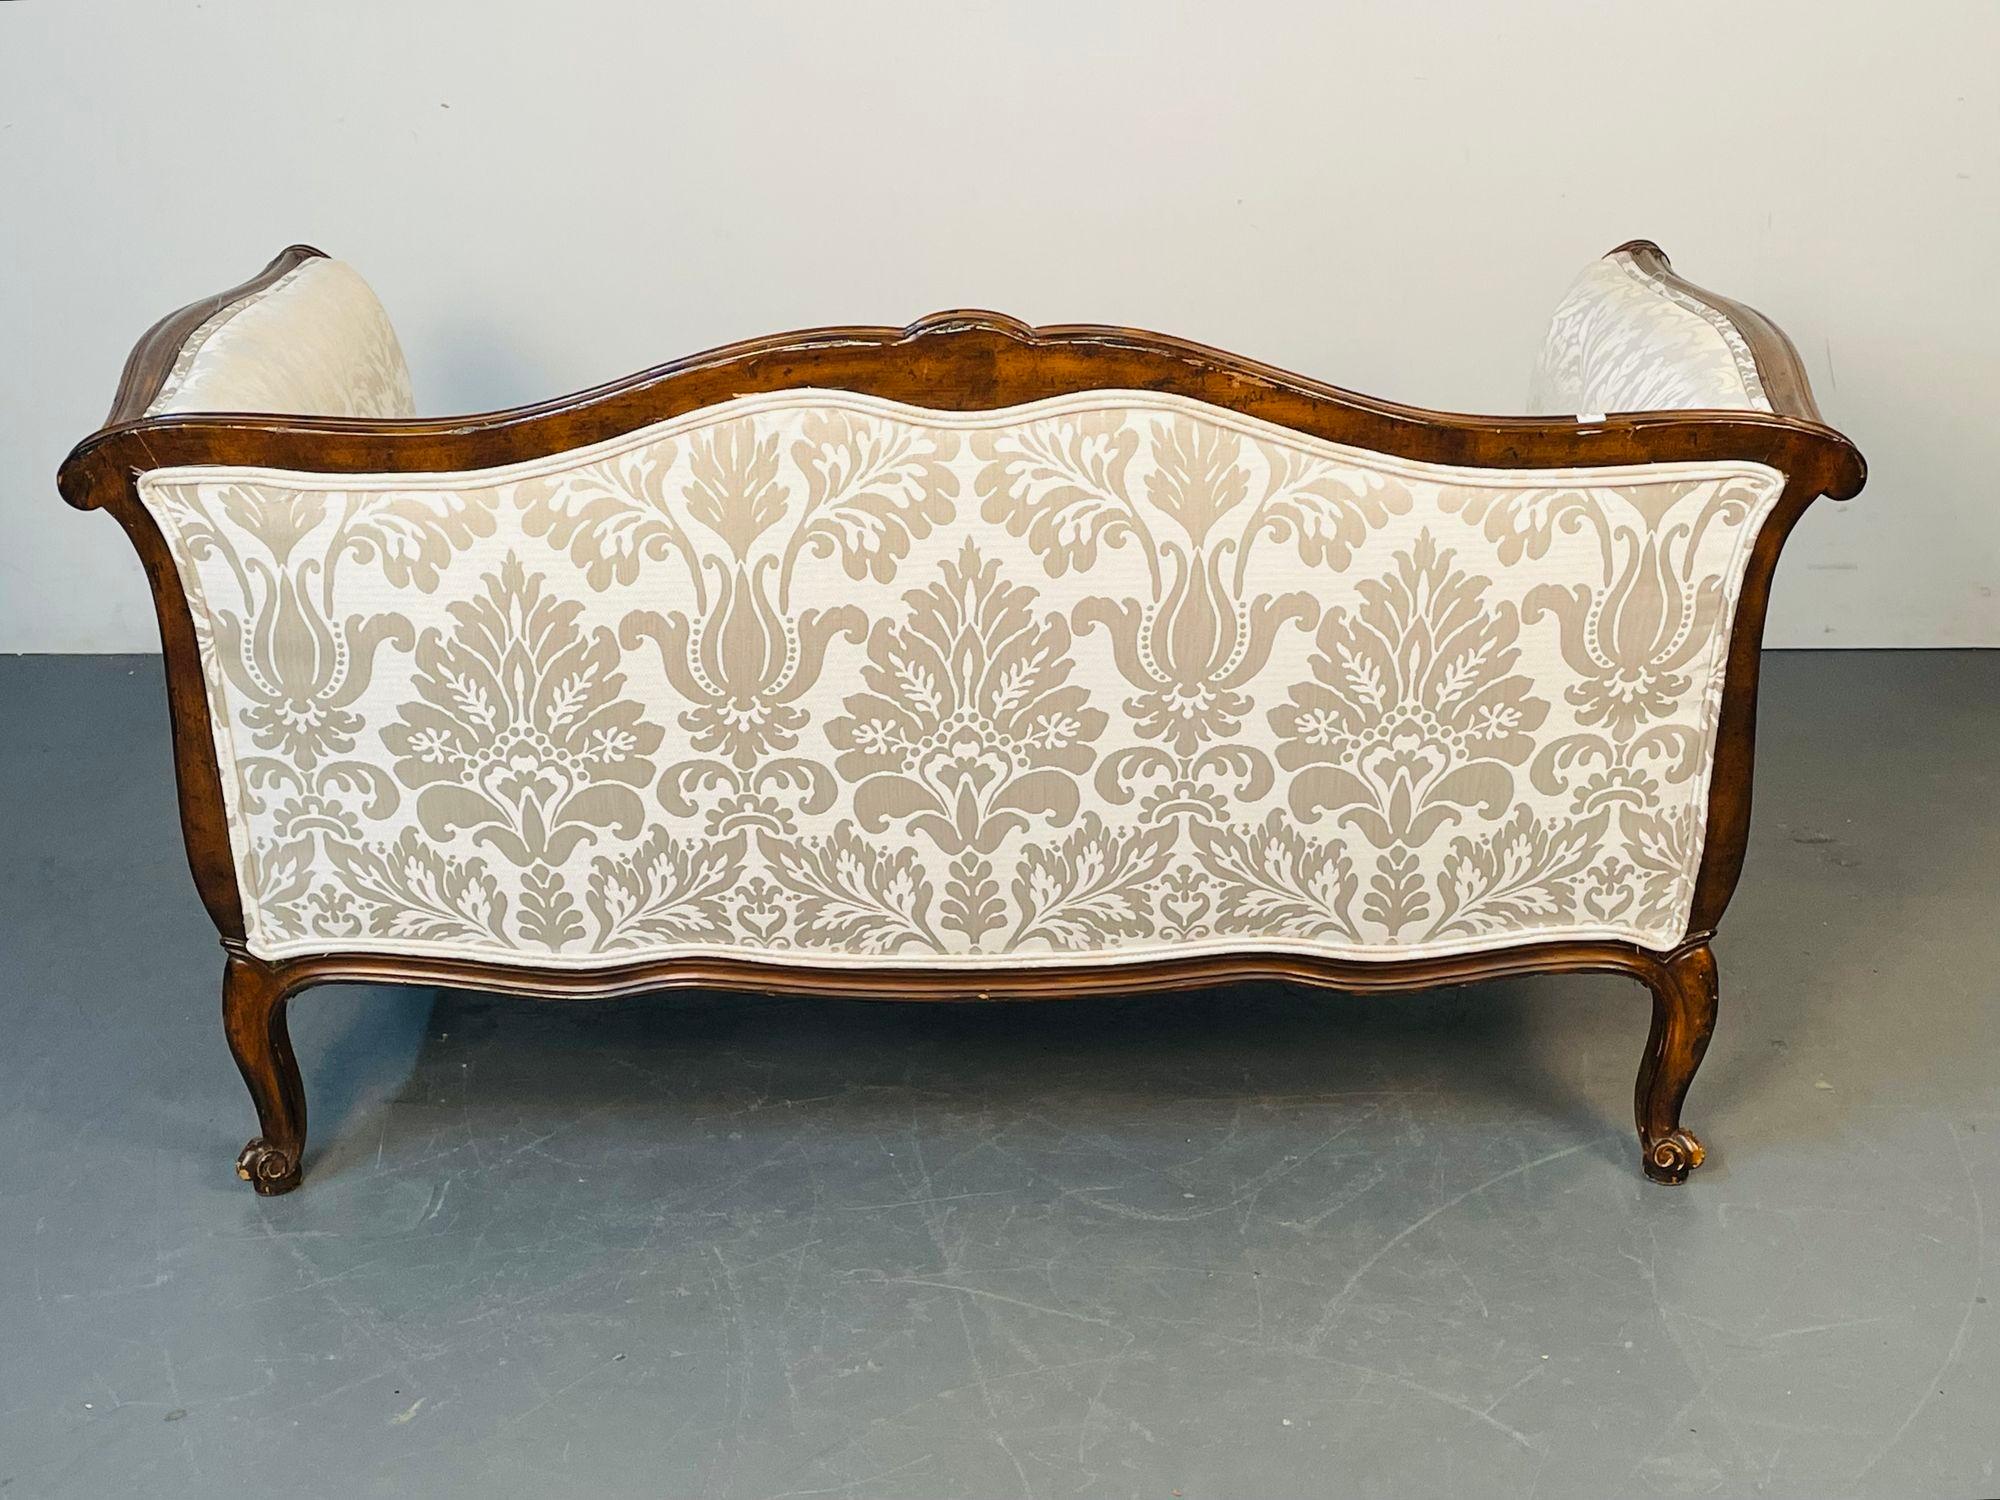 Louis XV Mahogany Carved Settee, Canape / Sofa, Floral Silk Upholstery For Sale 1